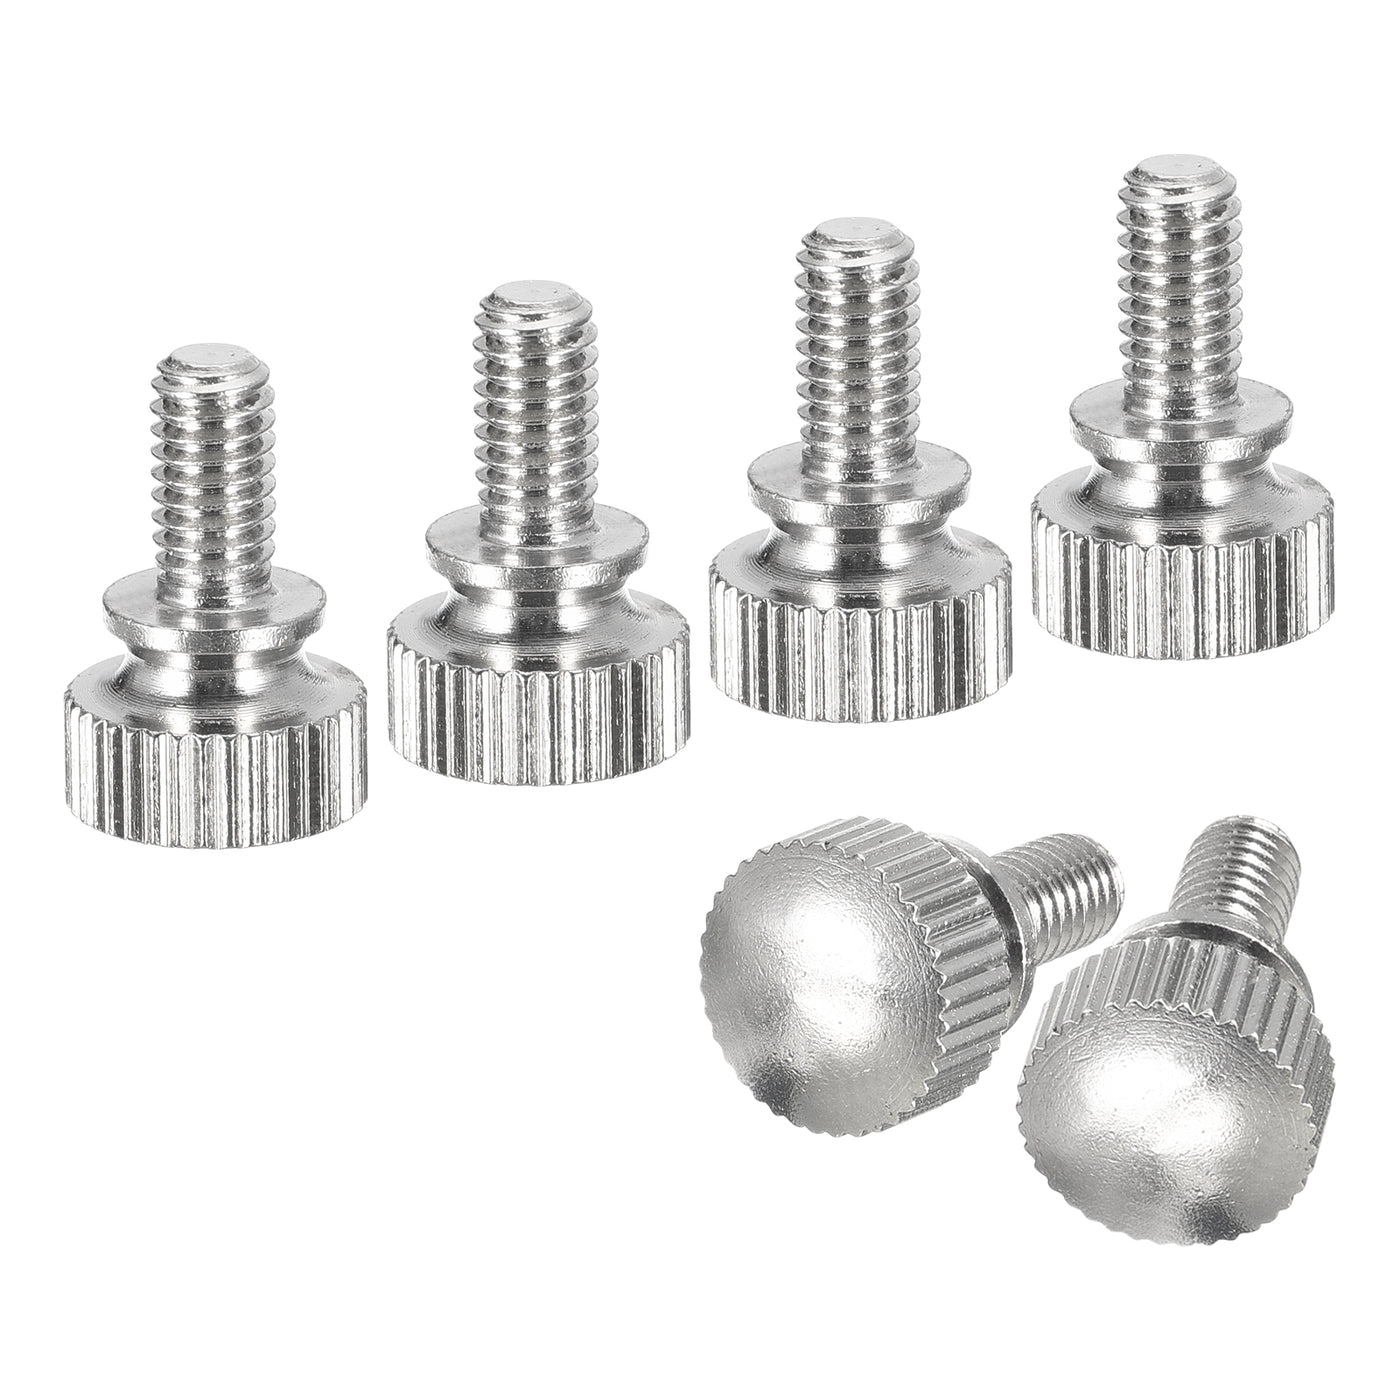 uxcell Uxcell M4x8mm Knurled Thumb Screws, 6pcs Brass Thumb Screws with Shoulder, Silver Tone